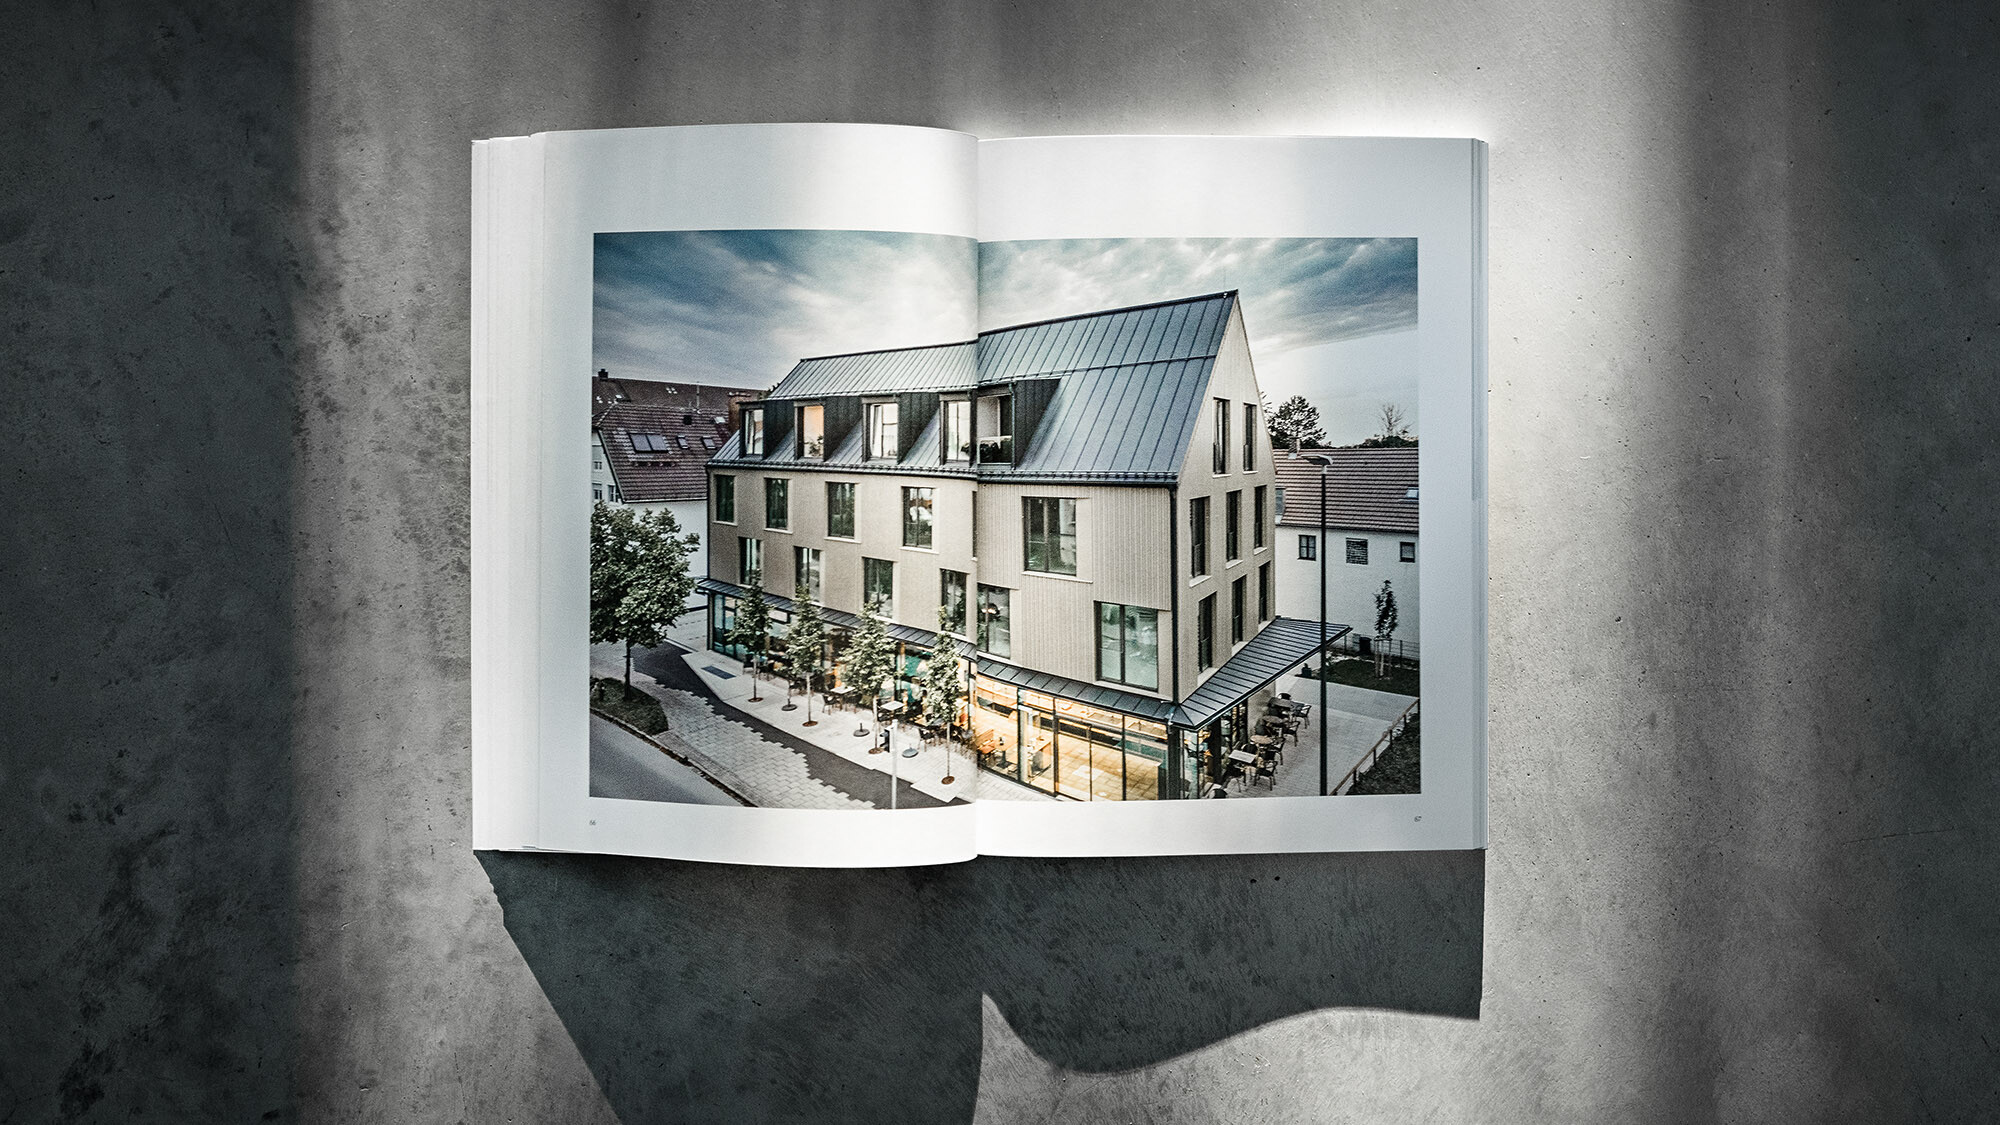 The open PREFARENZEN book 2024 with a double page showing the residential and commercial building Feldkirchen by Architekturbüro Heigl before a grey background.